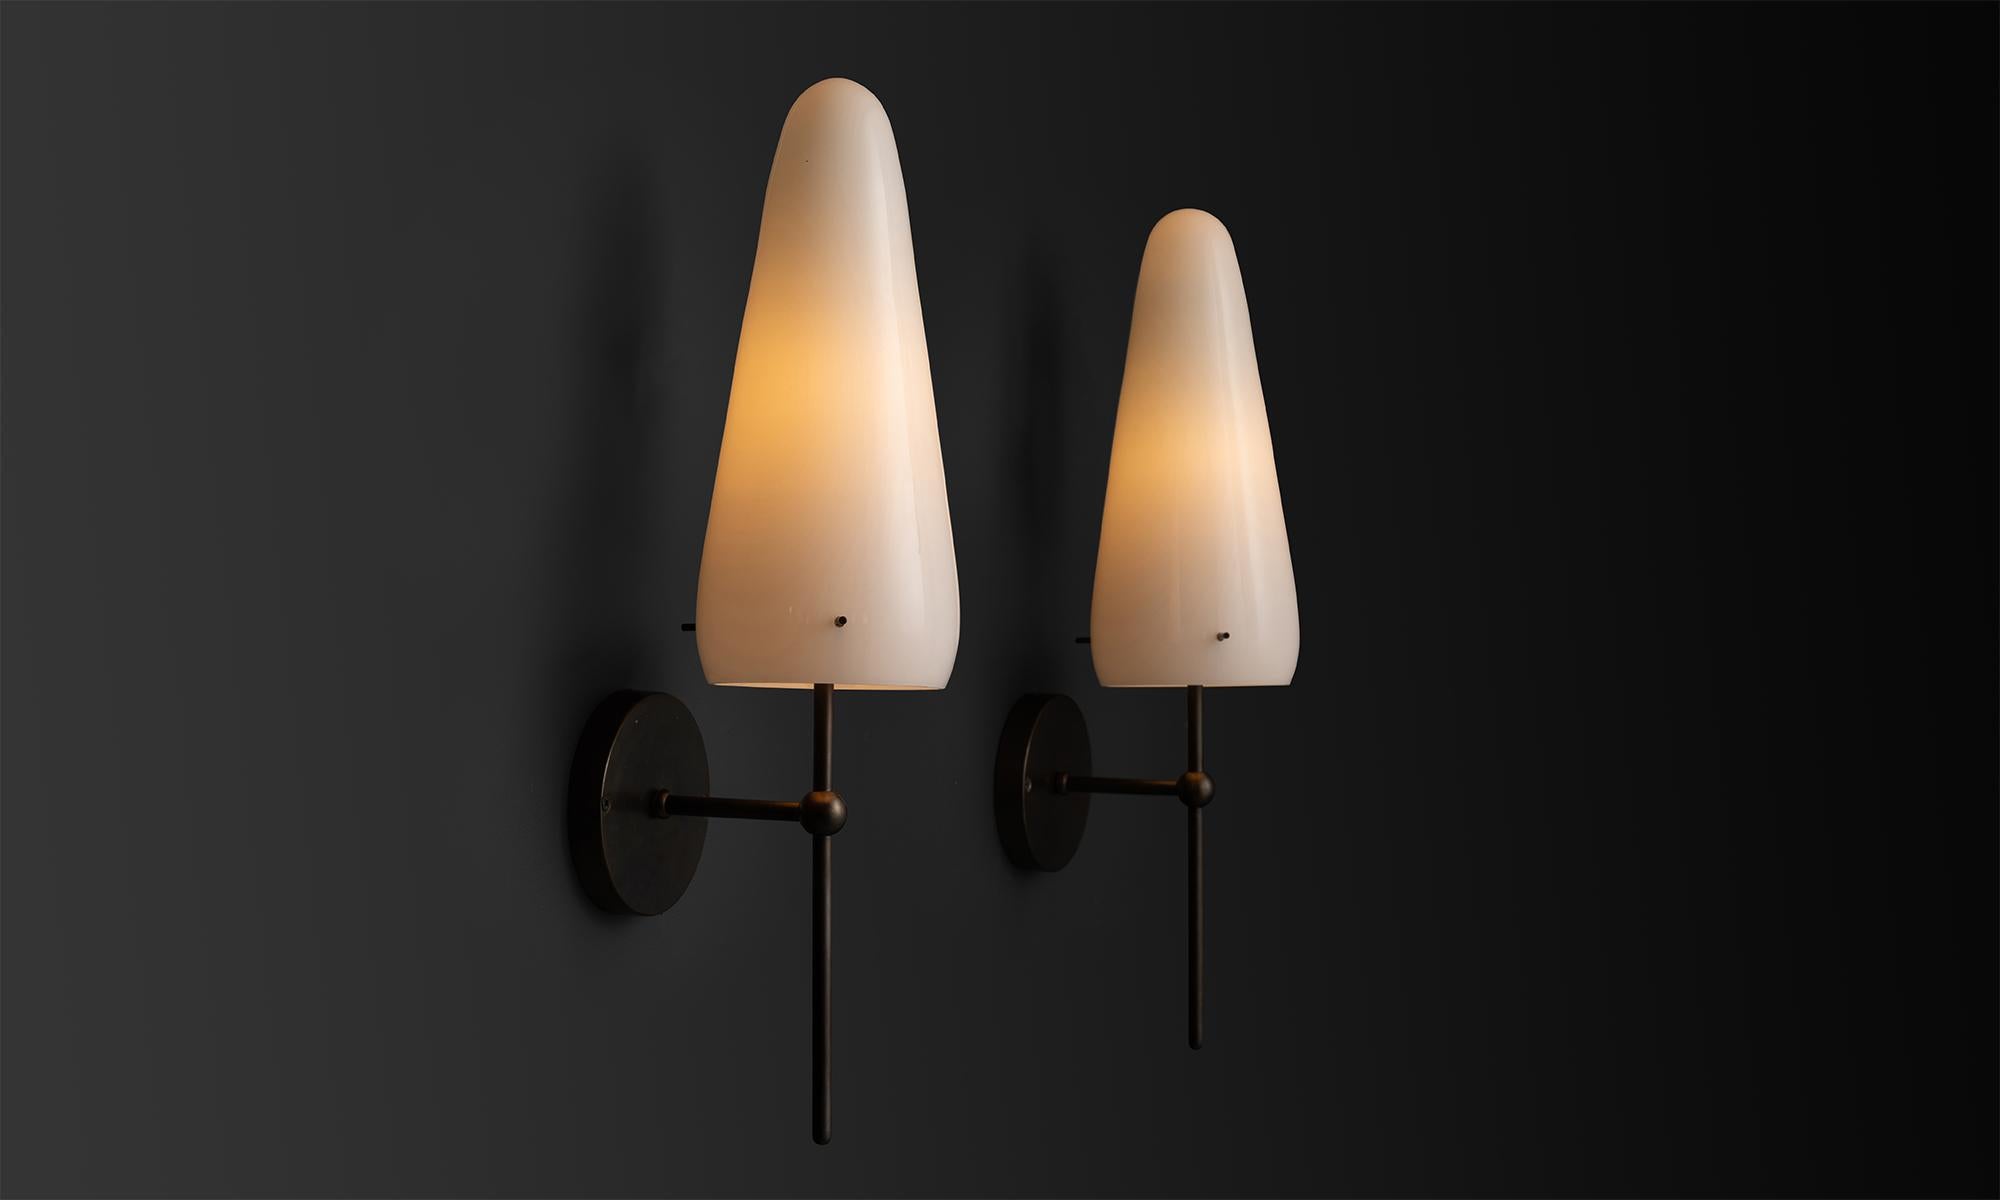 *Please note price is per unit*

*Not UL Listed*

Milk Glass Cone Sconce

Made in Italy

With brass hardware.

Measures 5